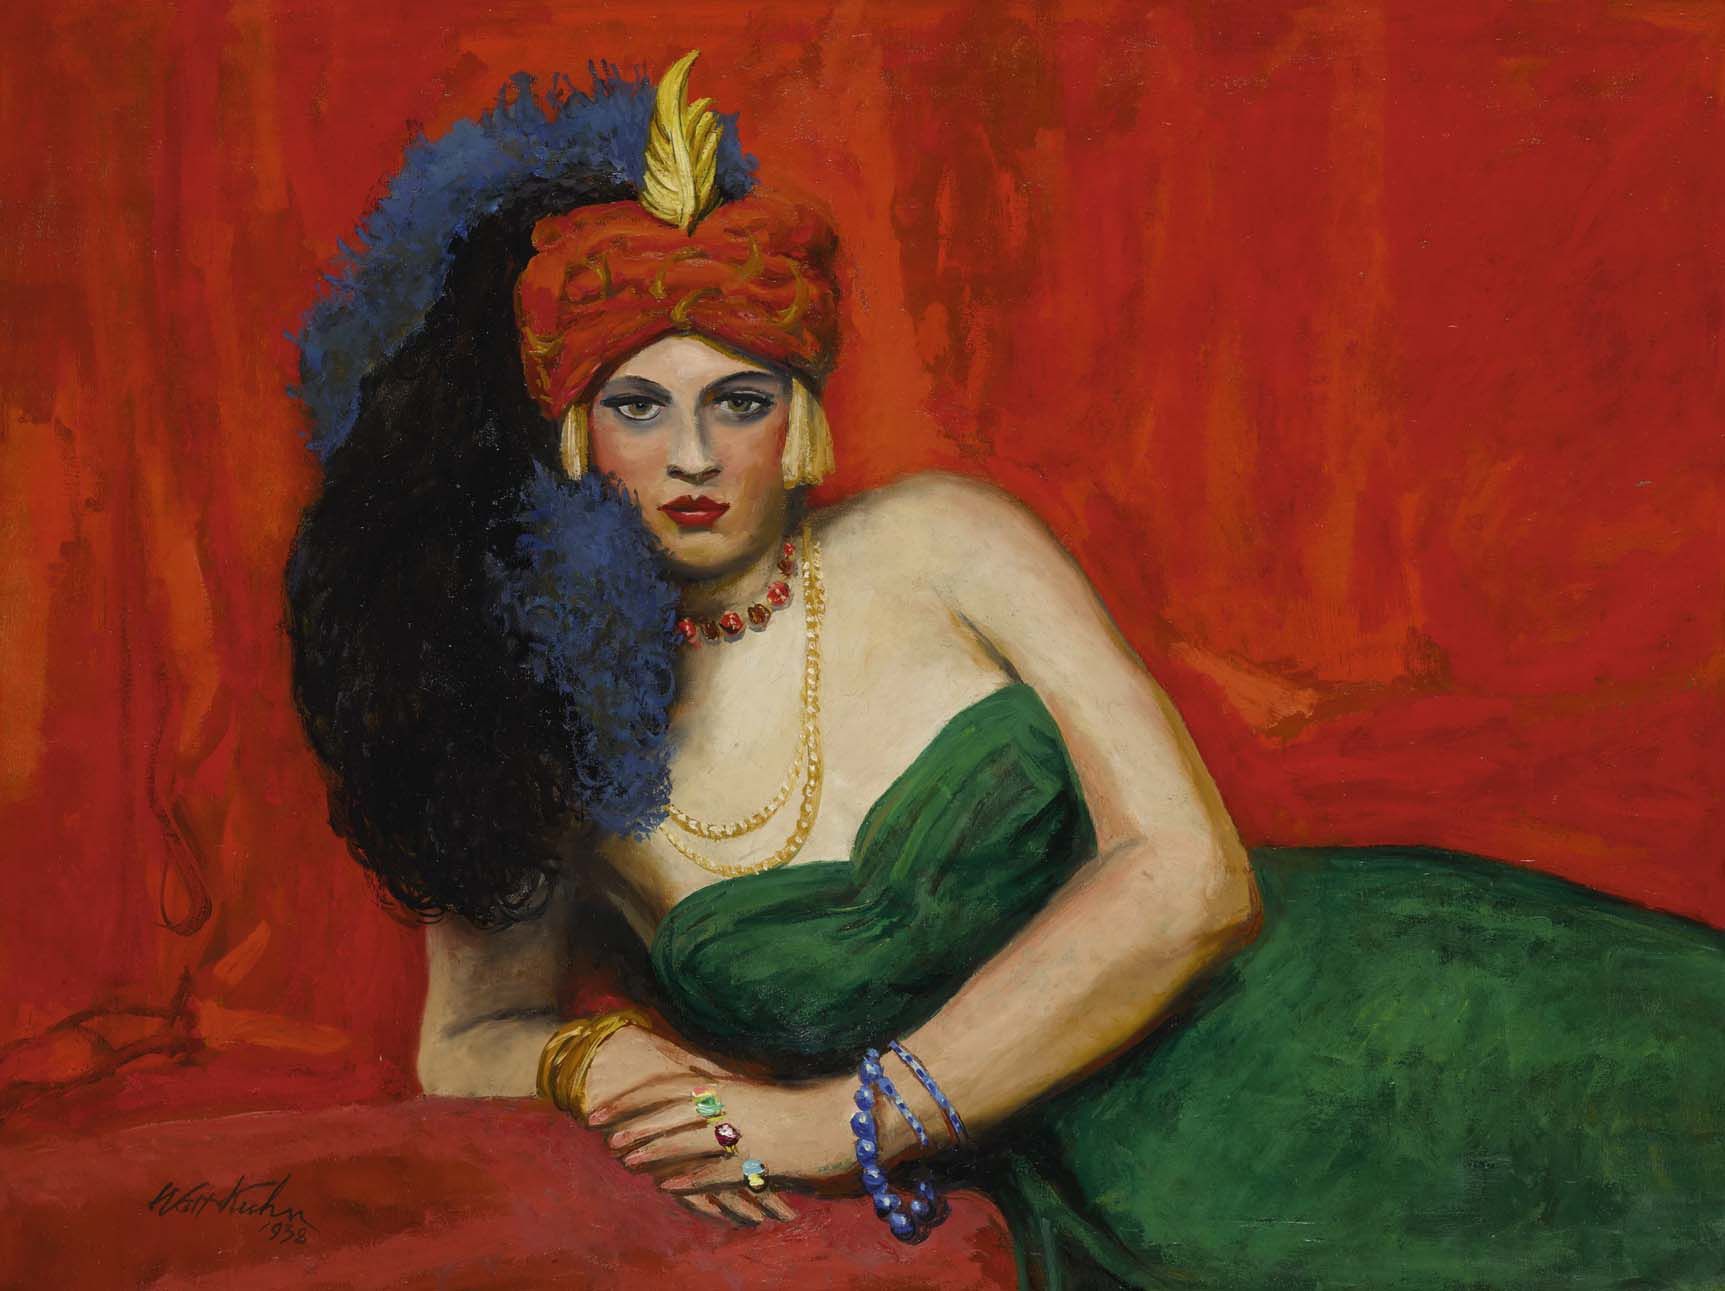 A woman wearing a green dress with a red headpiece that has a long blue and black feather tail